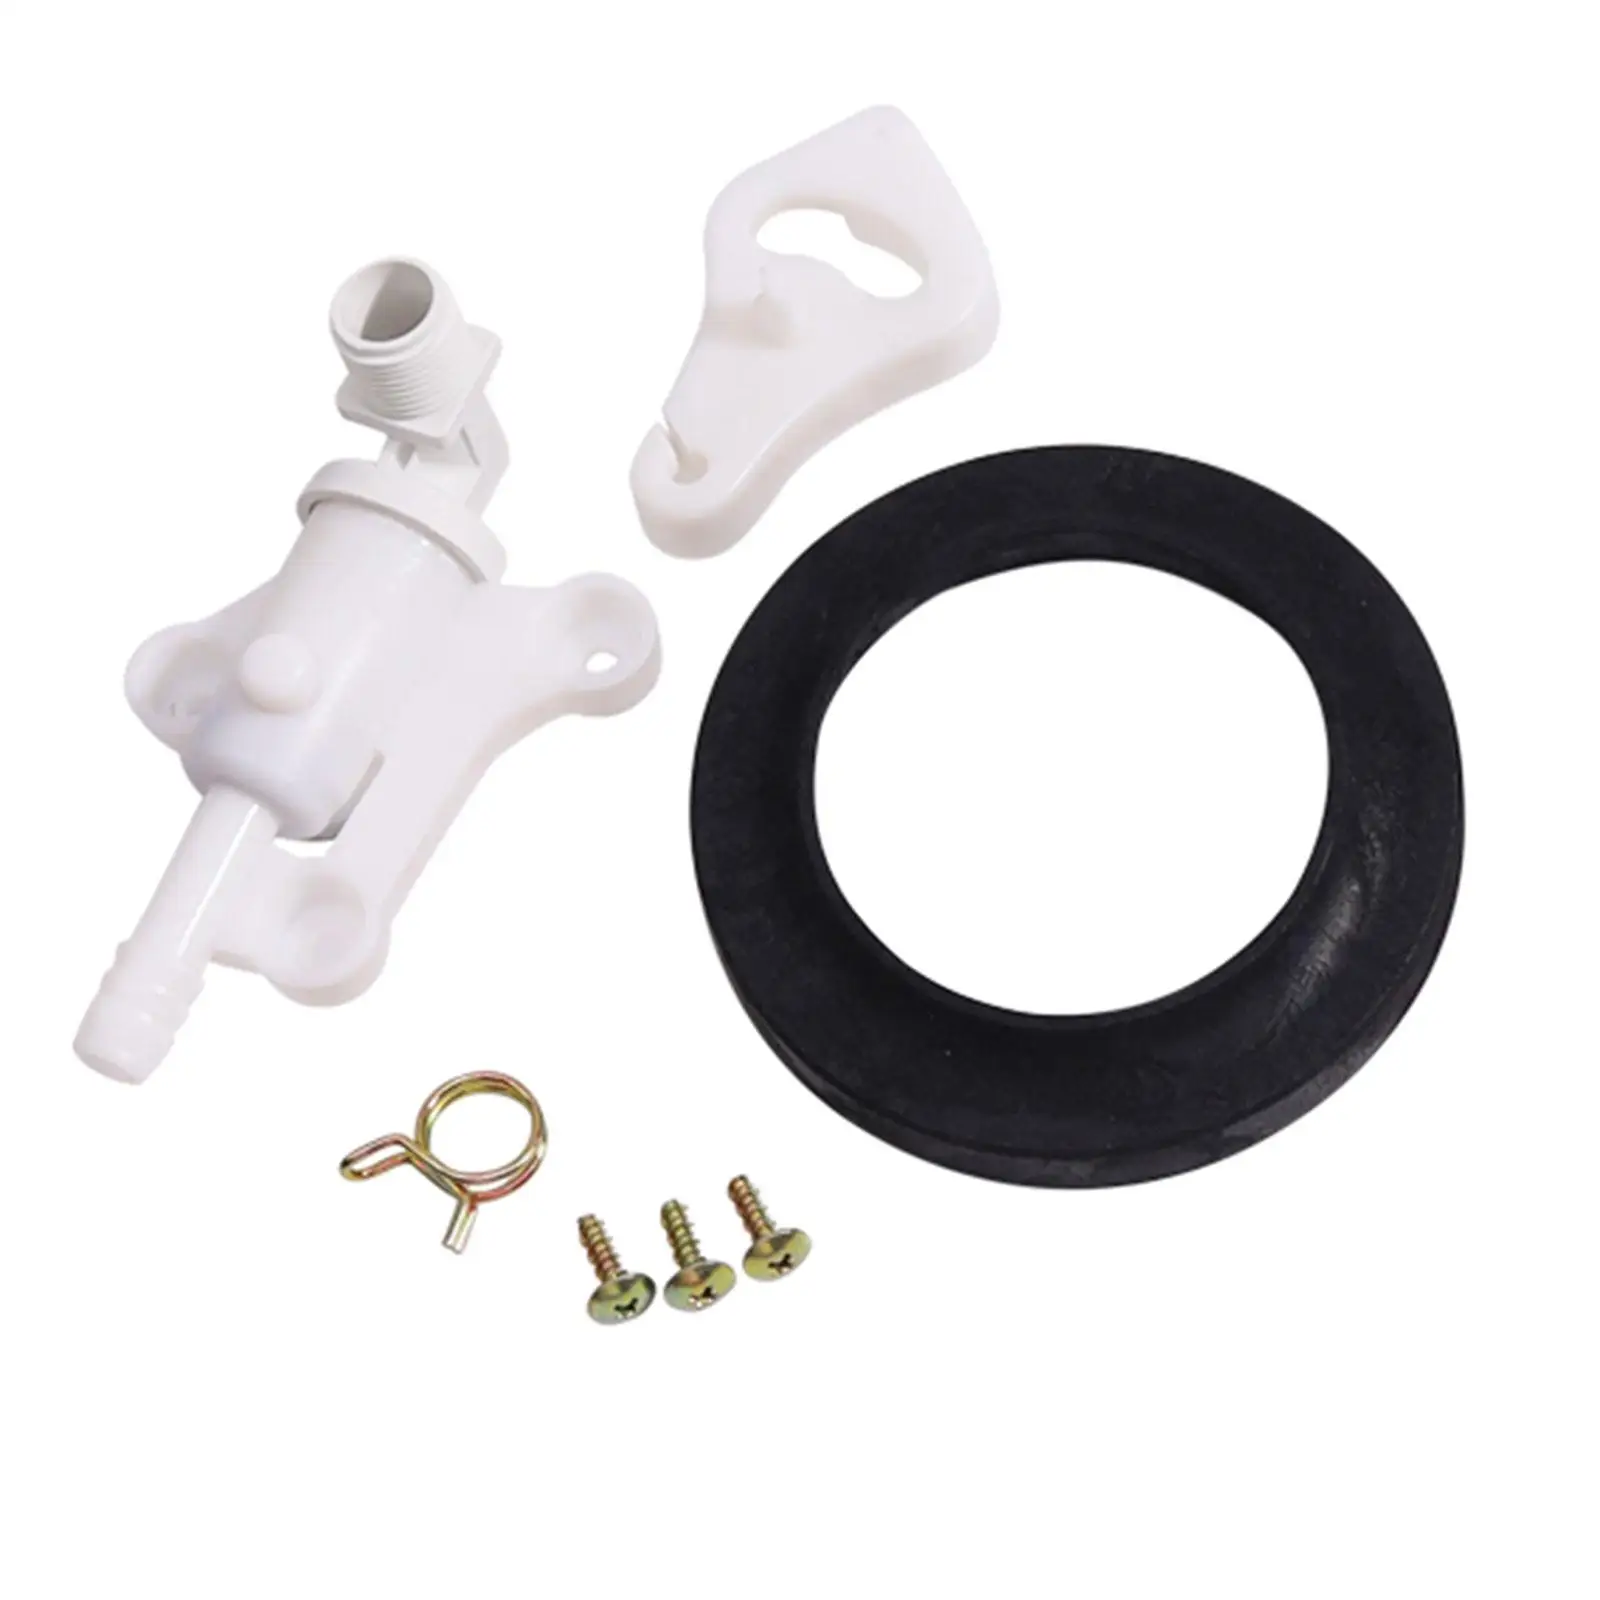 34100 RV Toilet Water Valve for Style Plus Toilets Replacements Accessories for